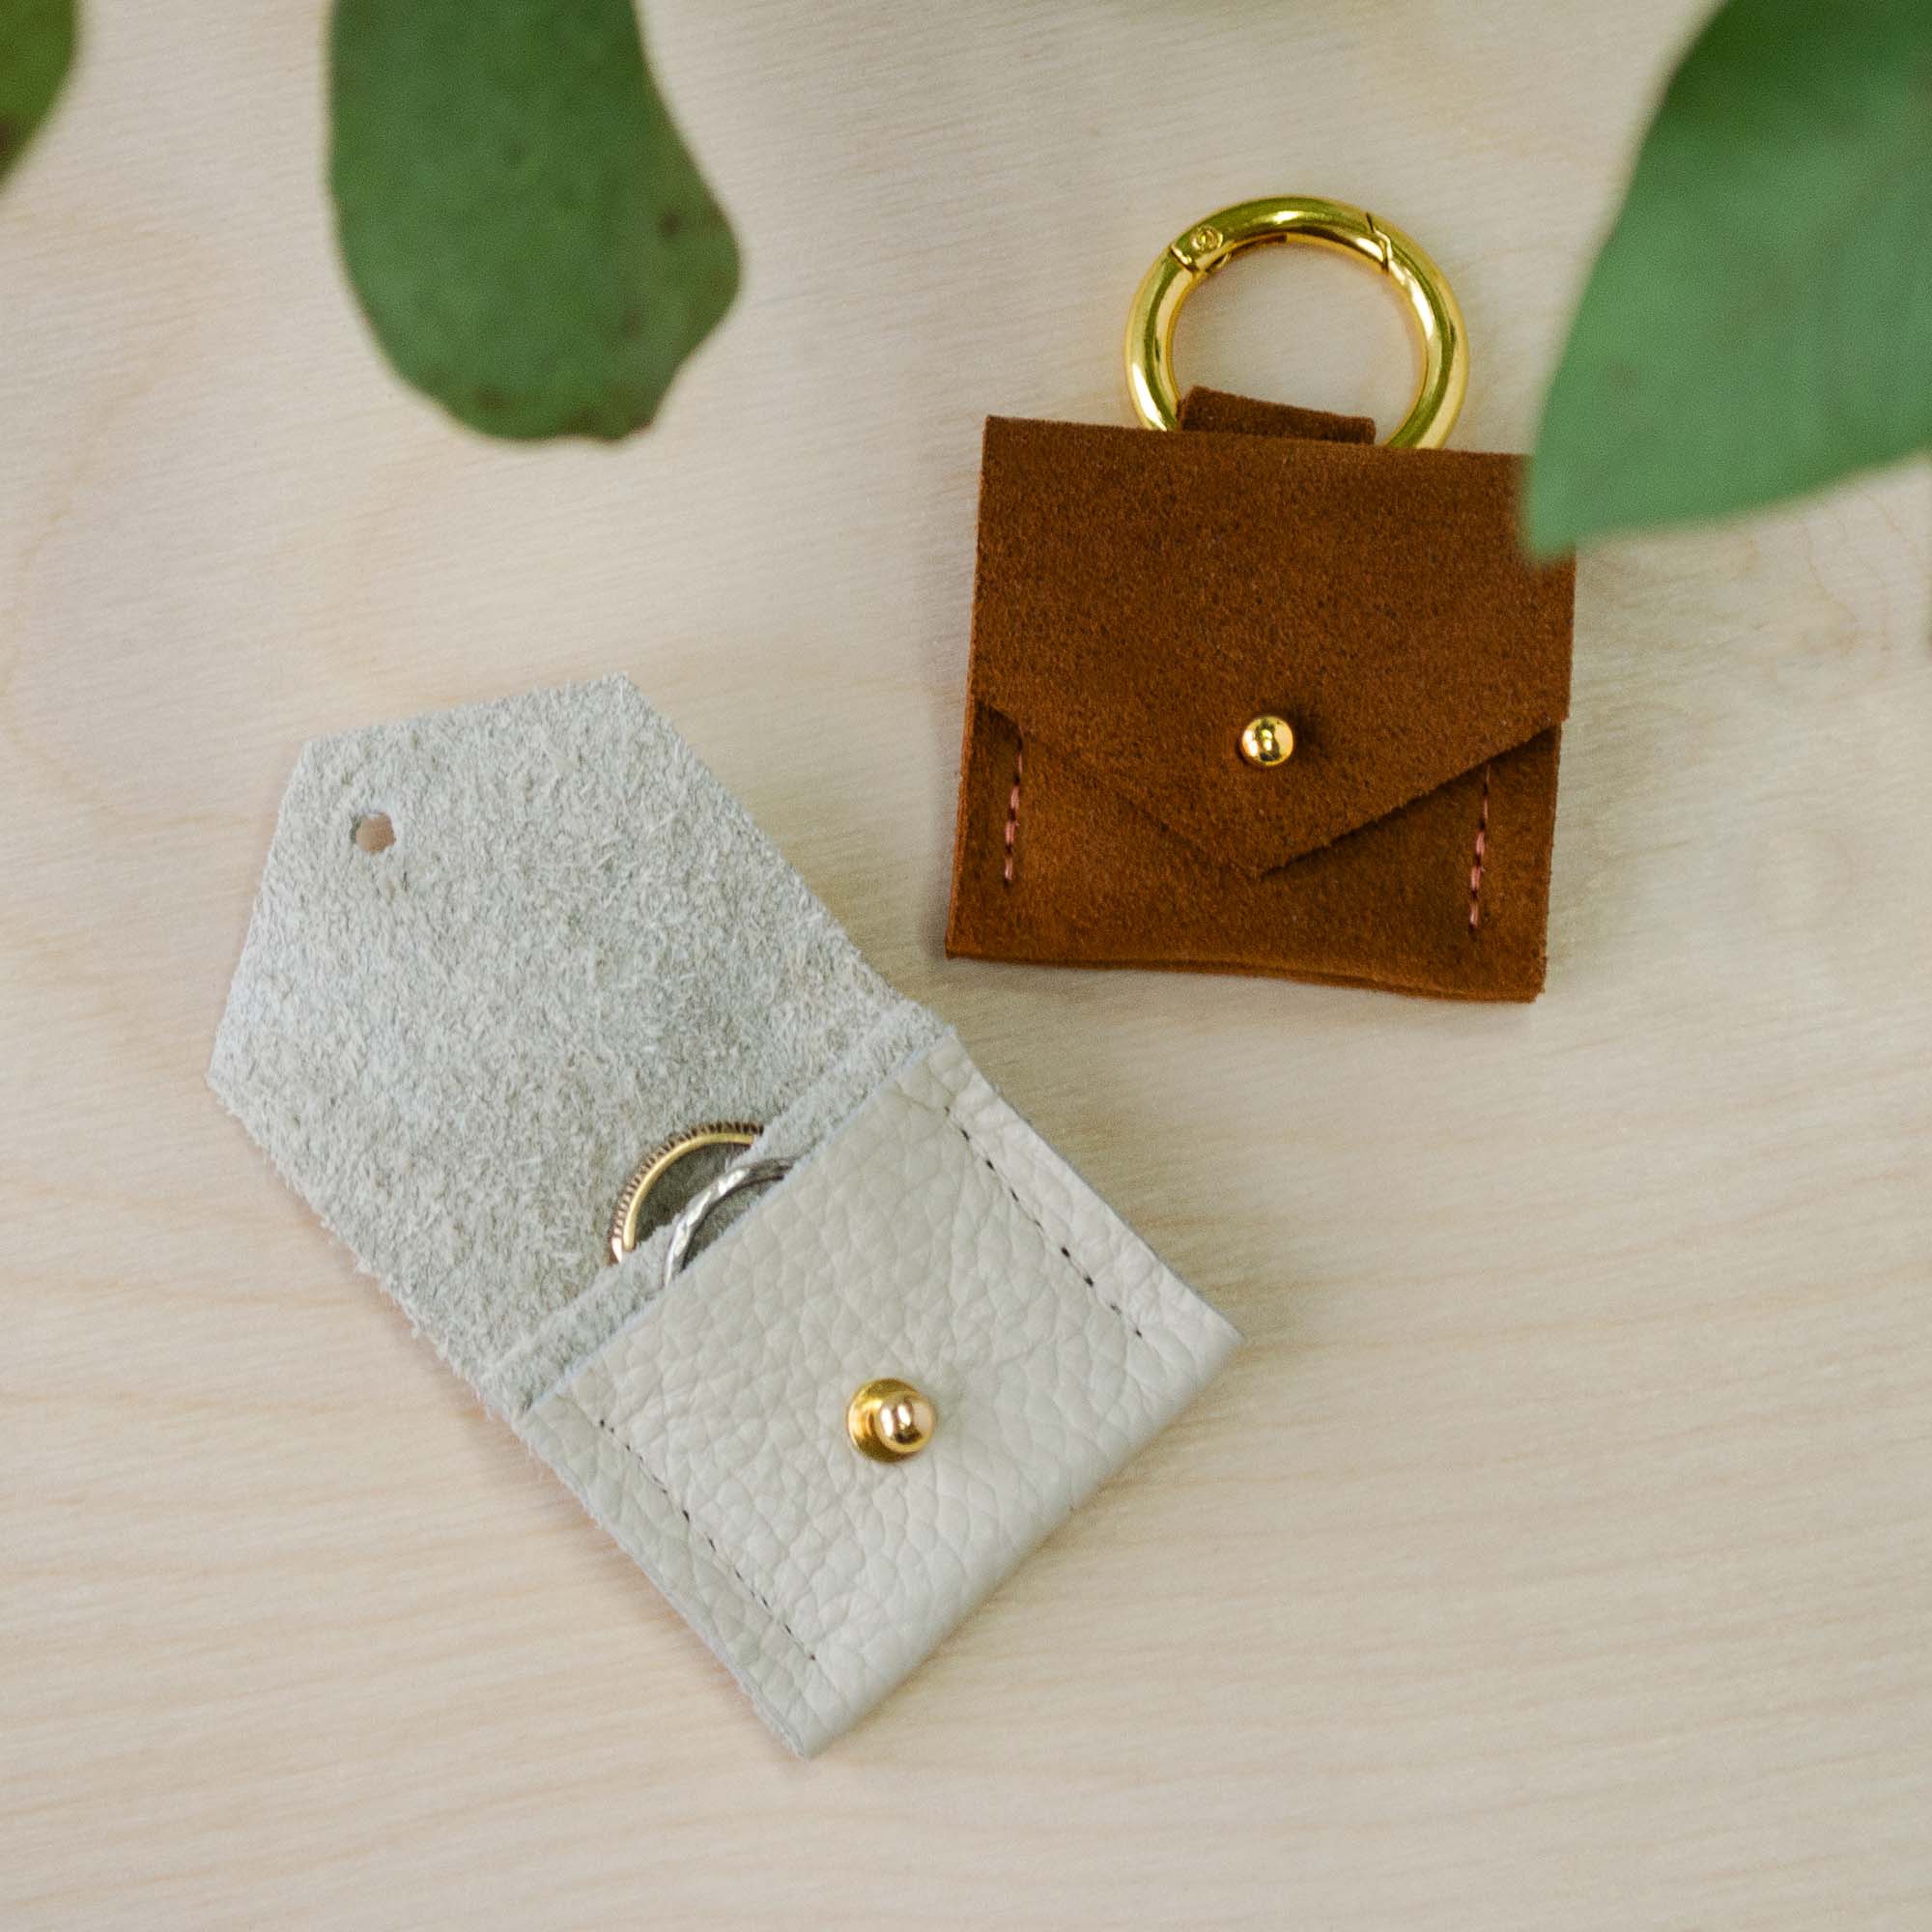 Dog wedding ring bearer pouch in cream and tan, inside the pouch there are two slots for two wedding bands.